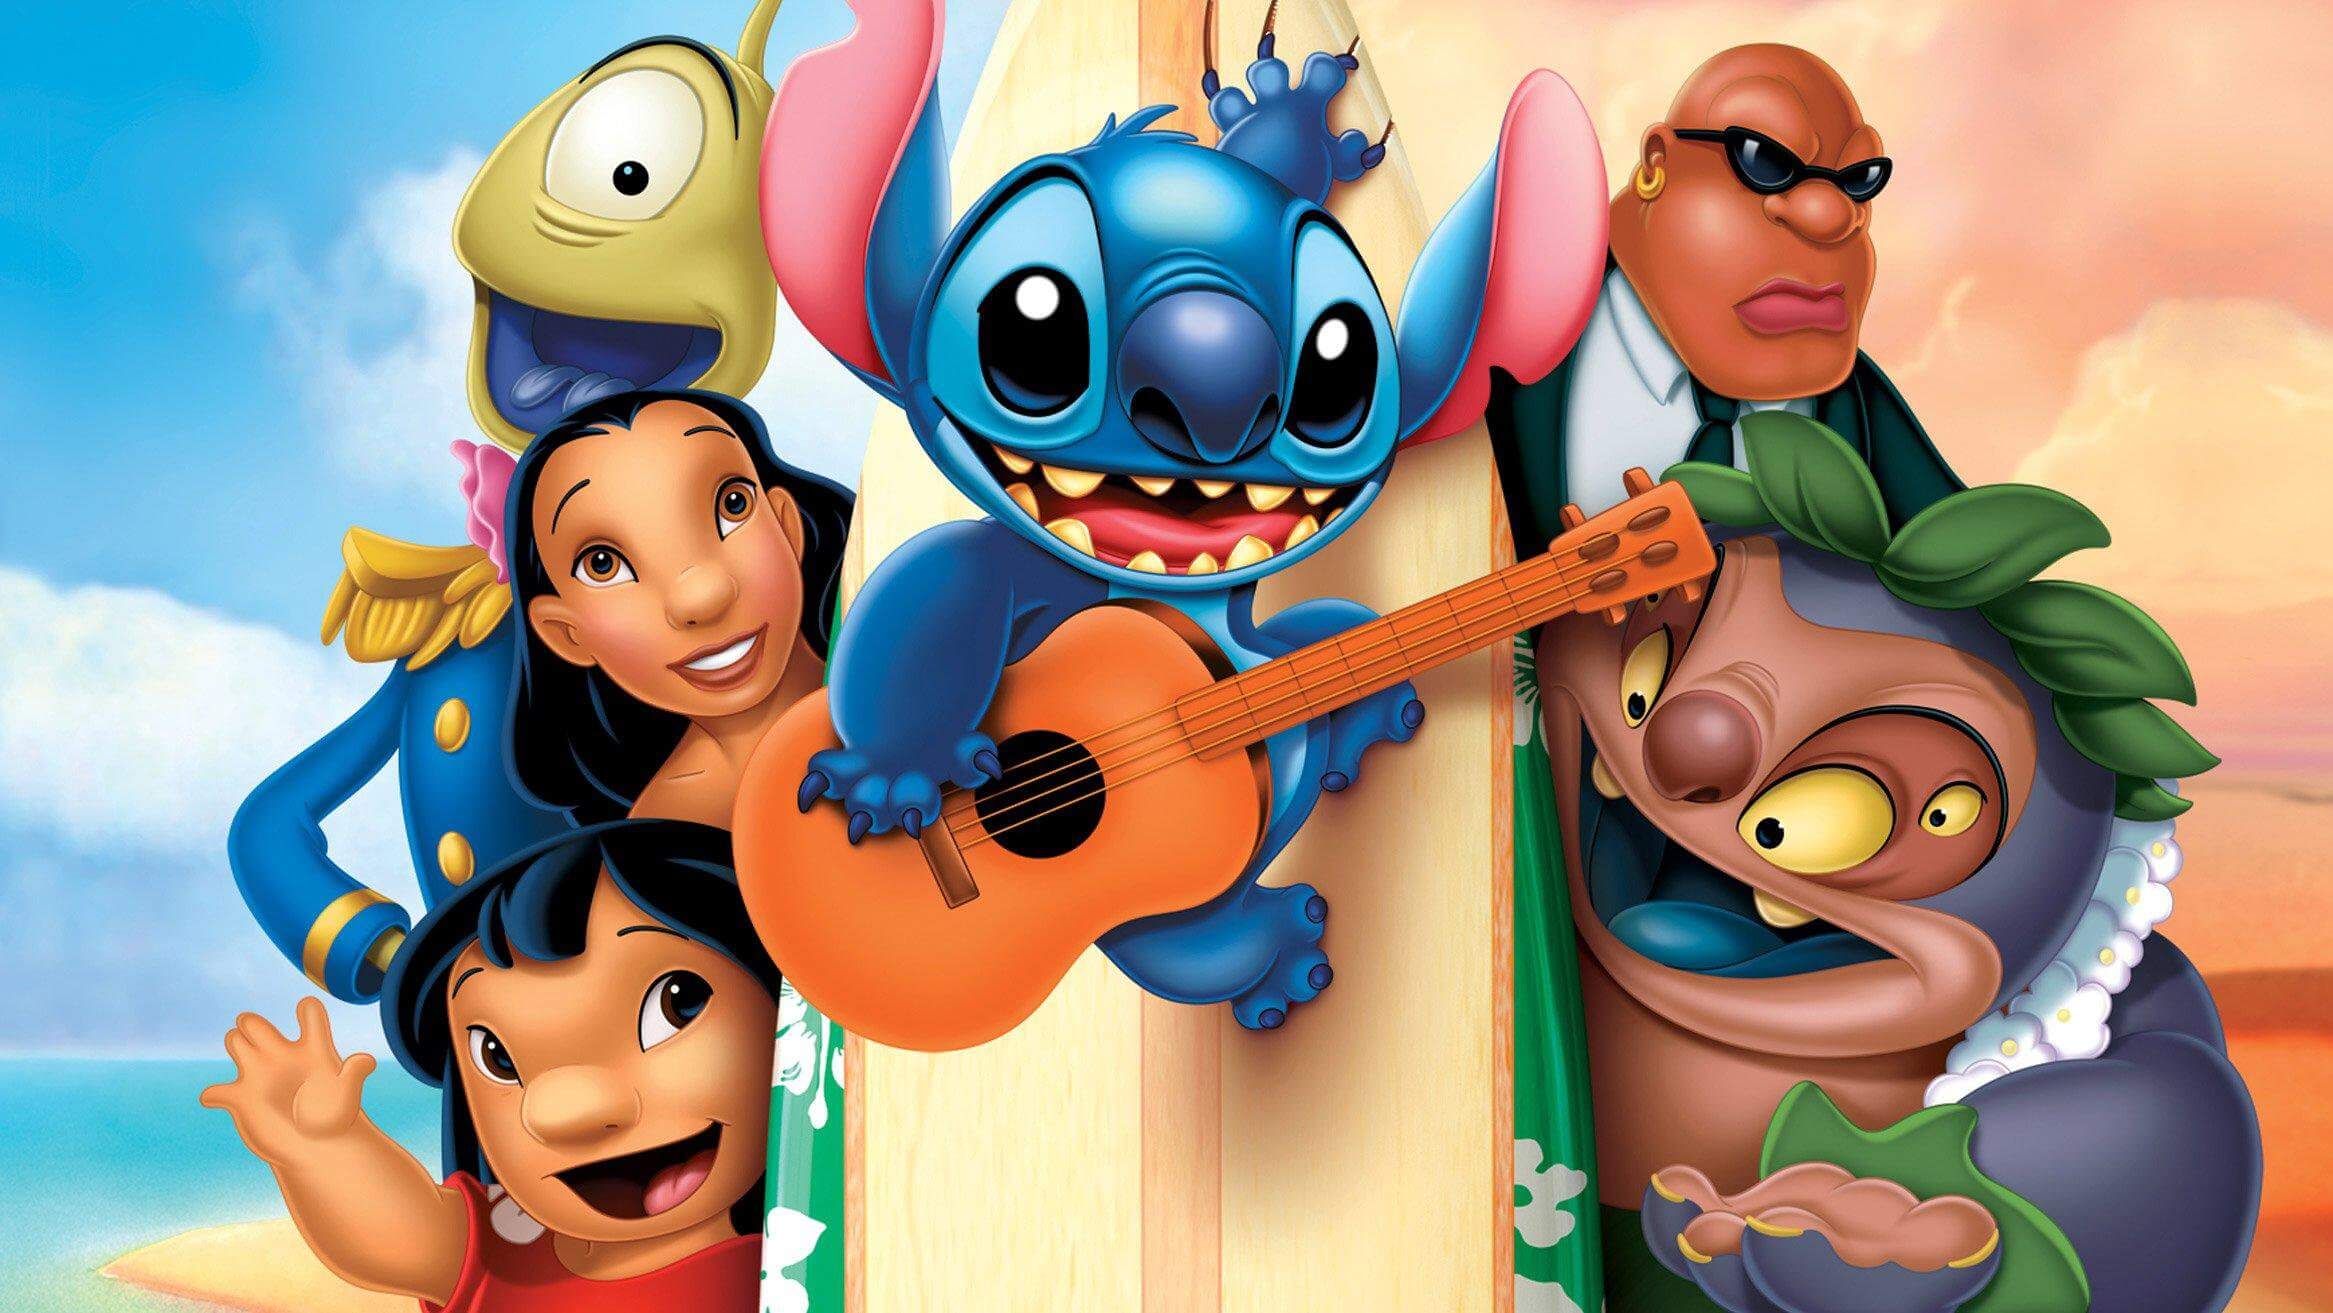 LILO & STITCH Live-Action Remake In The Works